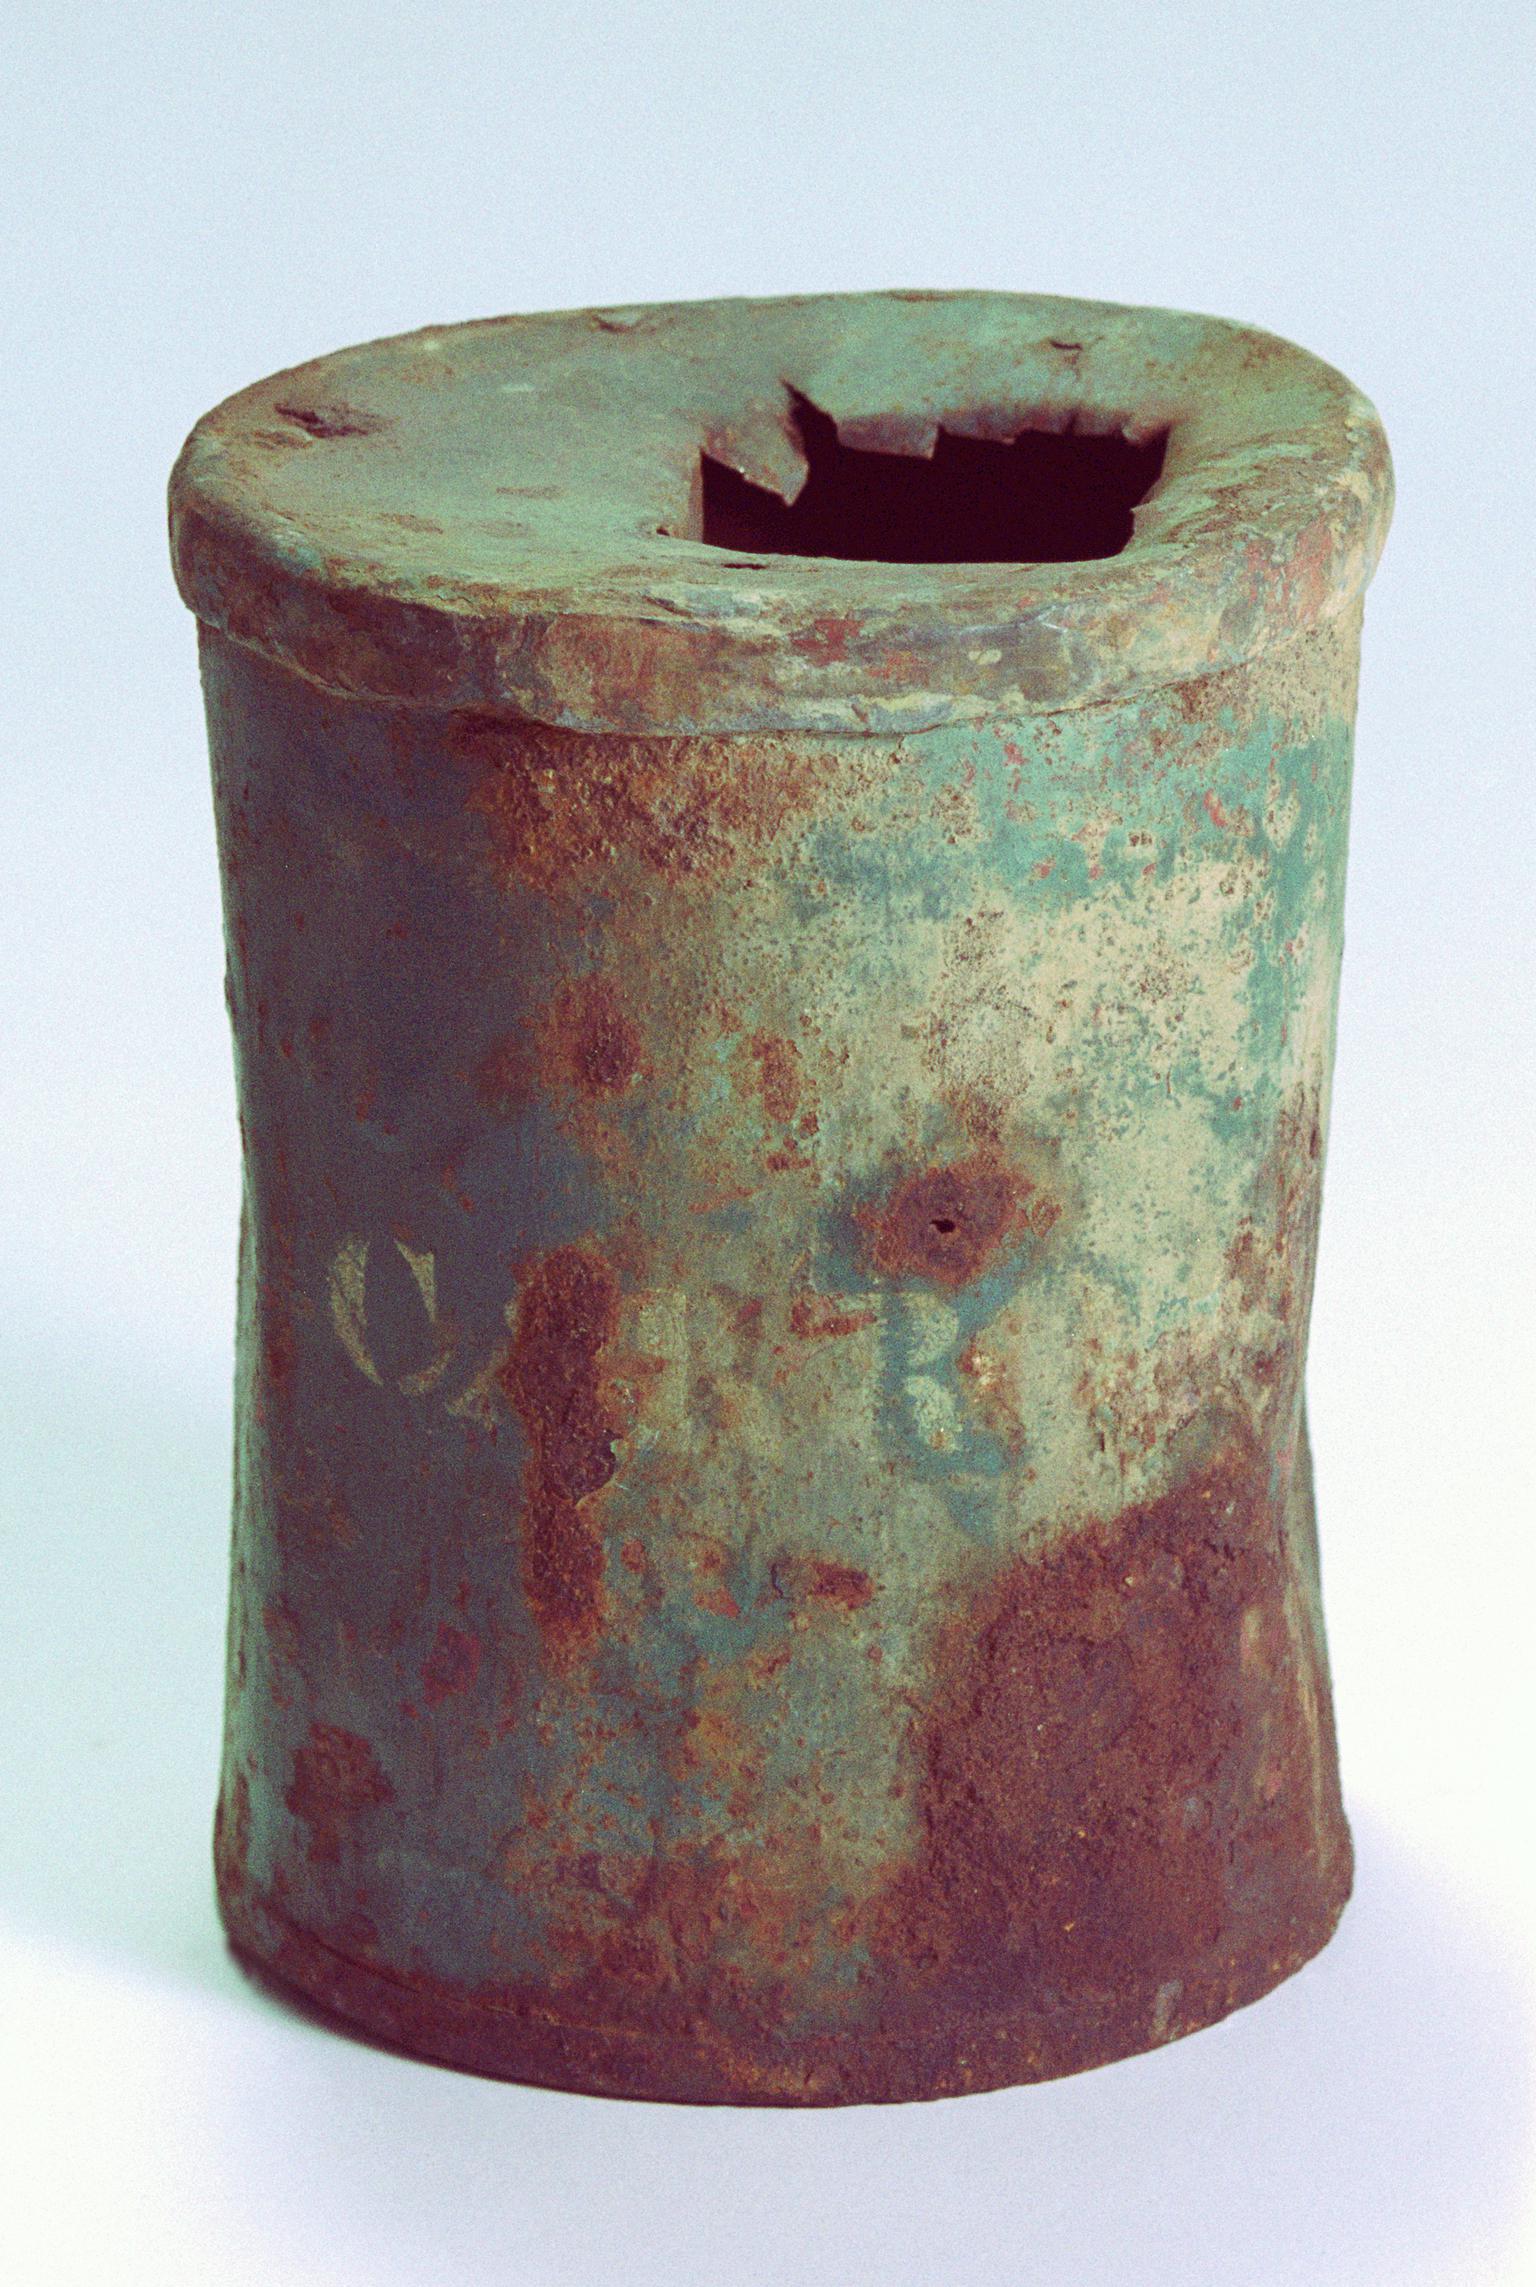 Tin can salvaged from Kellet expedition in 1852